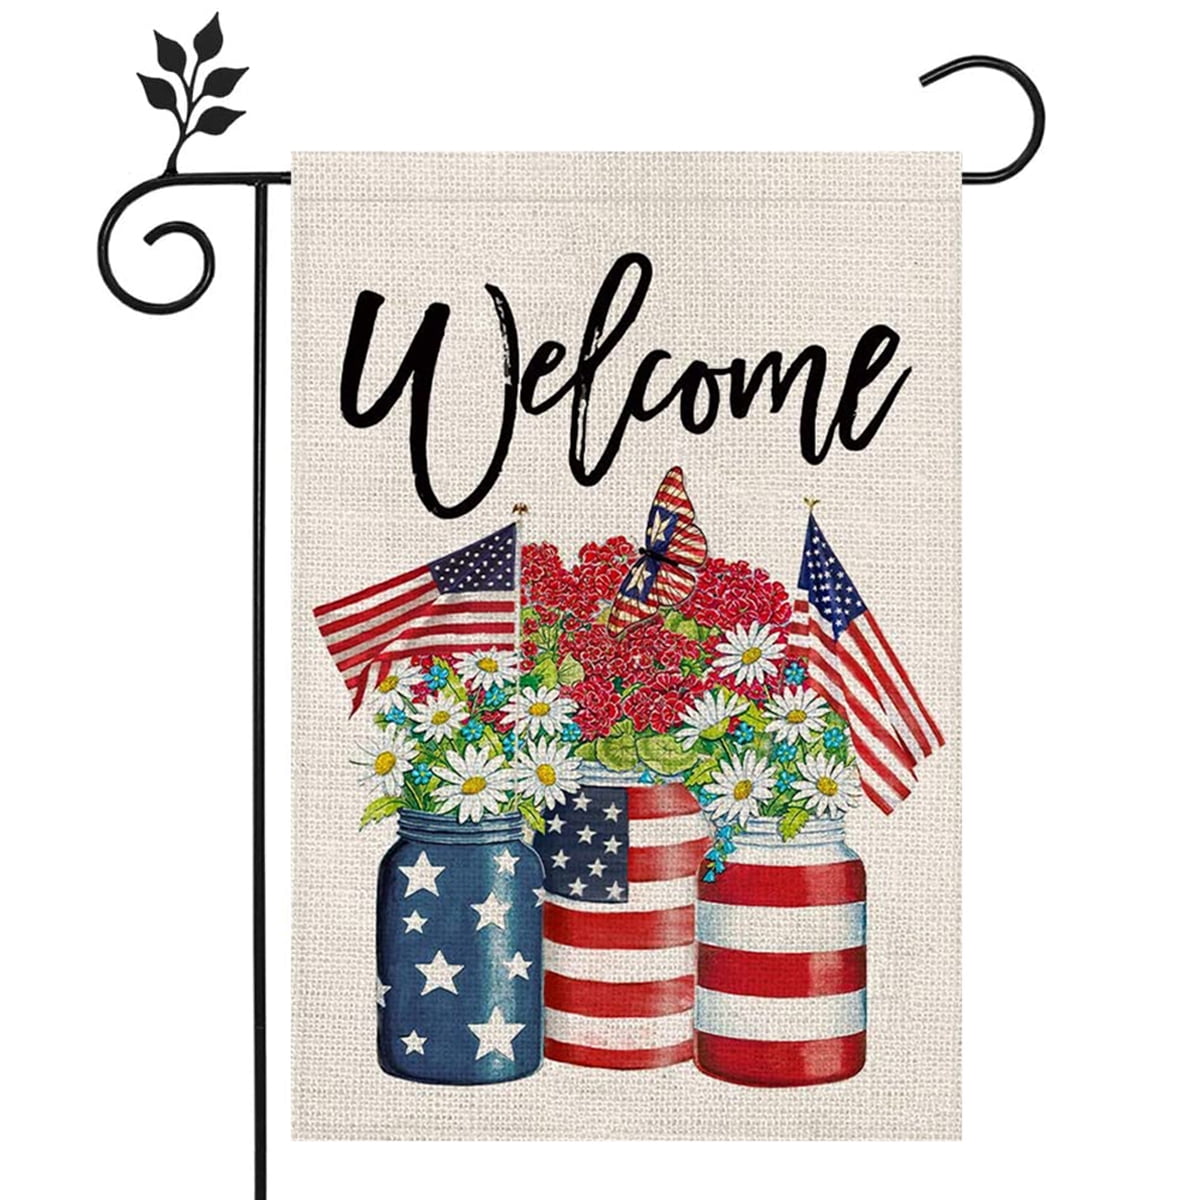 Patriotic Decorative Flag Initial Letter Garden Flags with Monogram B Double Sided American Independence Day Flag Welcome Burlap Garden Flags 12.5×18 Inch for House Yard Patio Outdoor Decor B